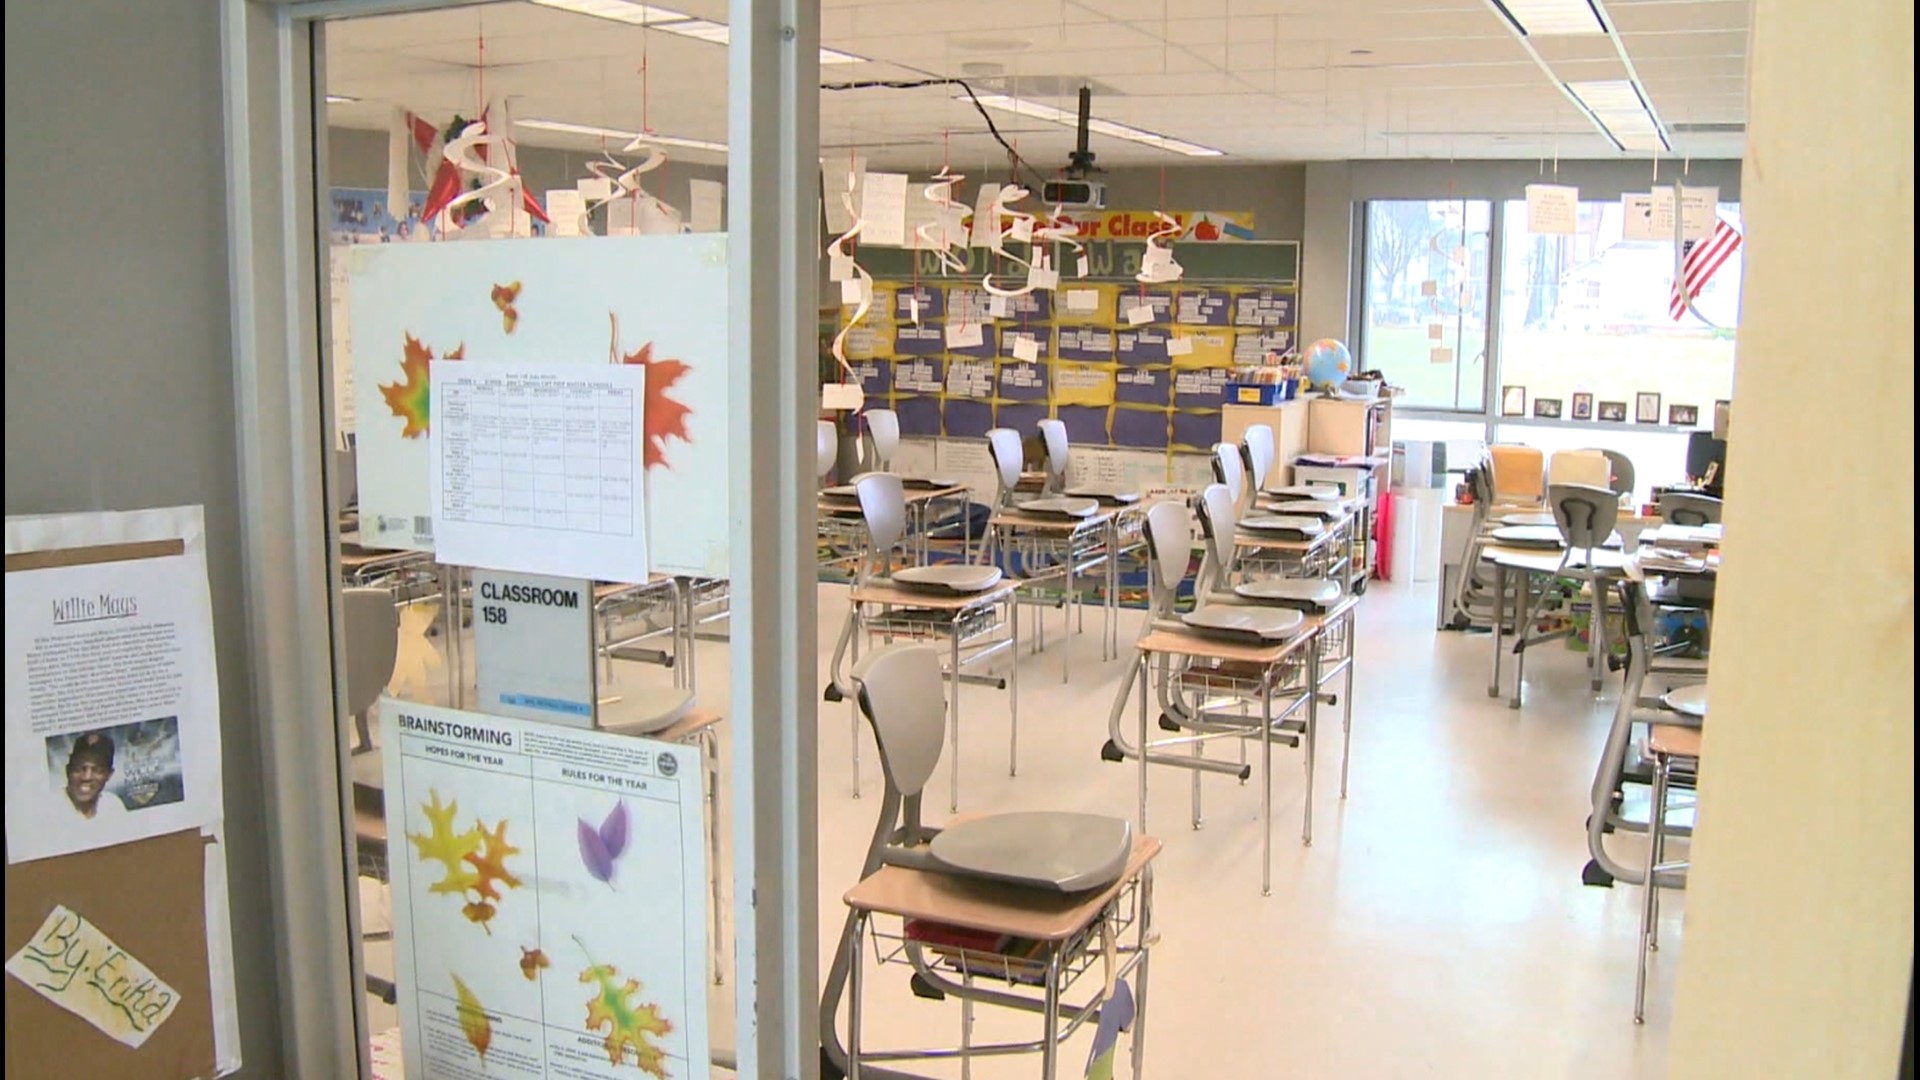 The $2.5 million federal grant will help with educational programs at Fair Haven School.